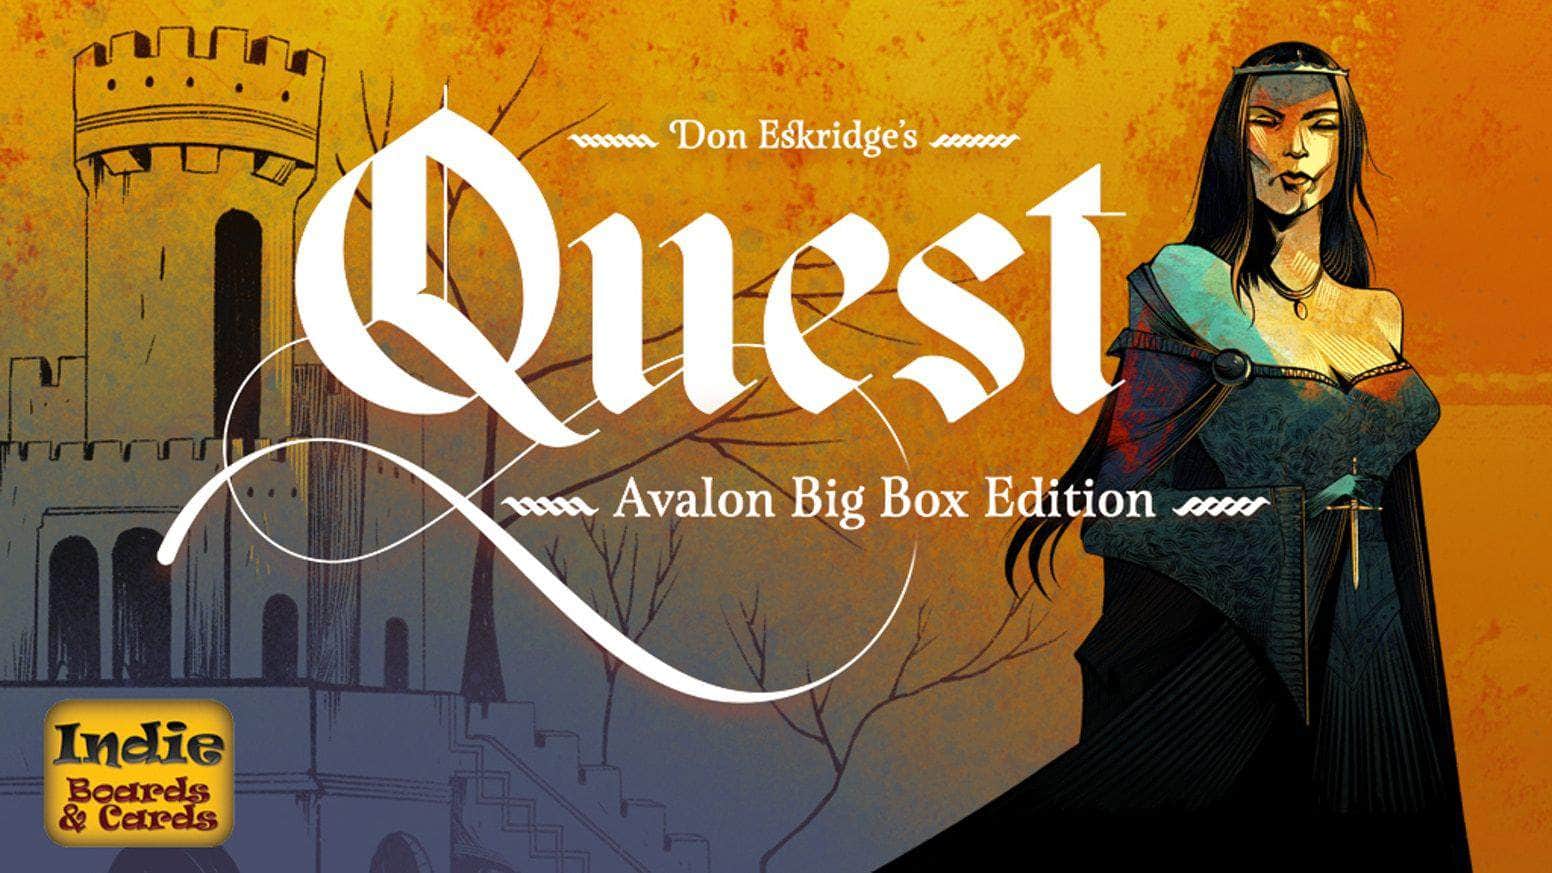 Quest: Avalon Big Box Edition (Kickstarter Special) Kickstarter Board Game Indie Boards and Cards 0792273252704 KS800718A